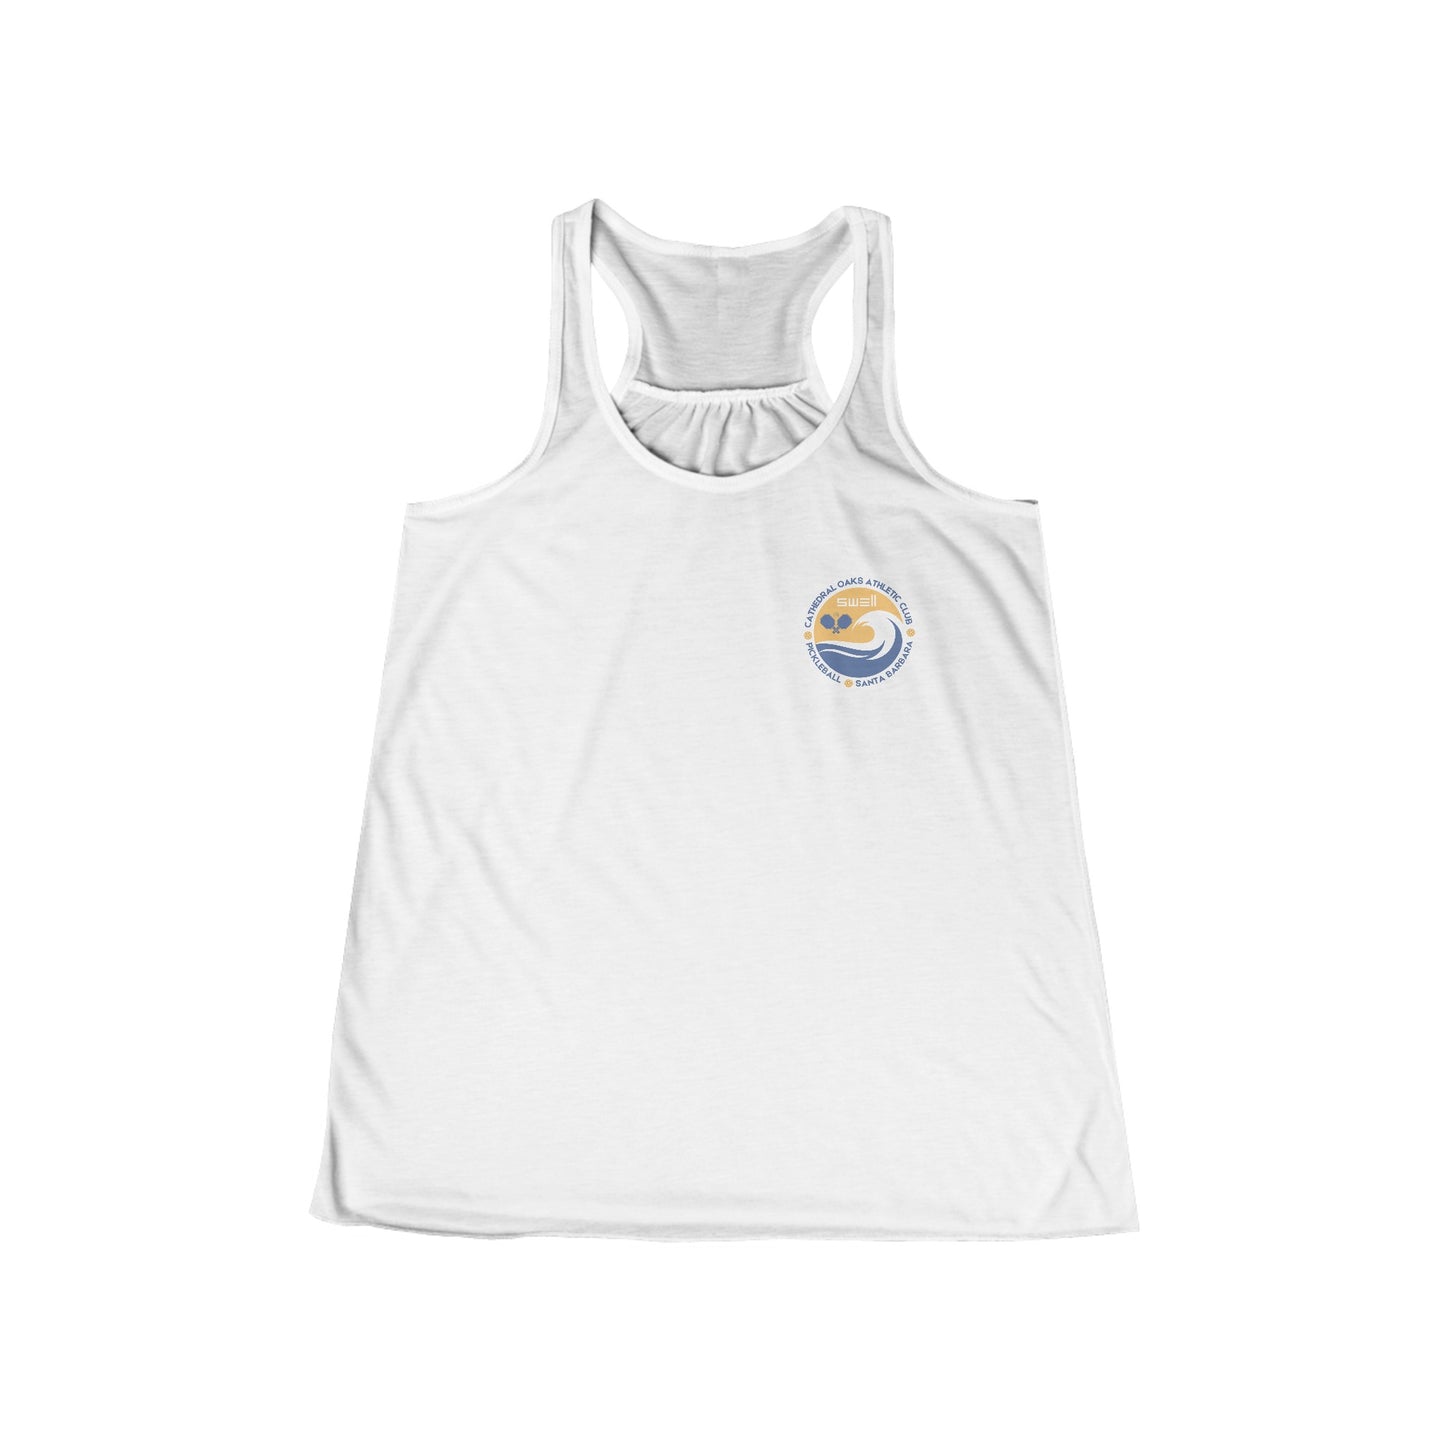 SWELL - Cathedral Oaks - Customize Women's Flowy Racerback Tank (cotton/poly blend)